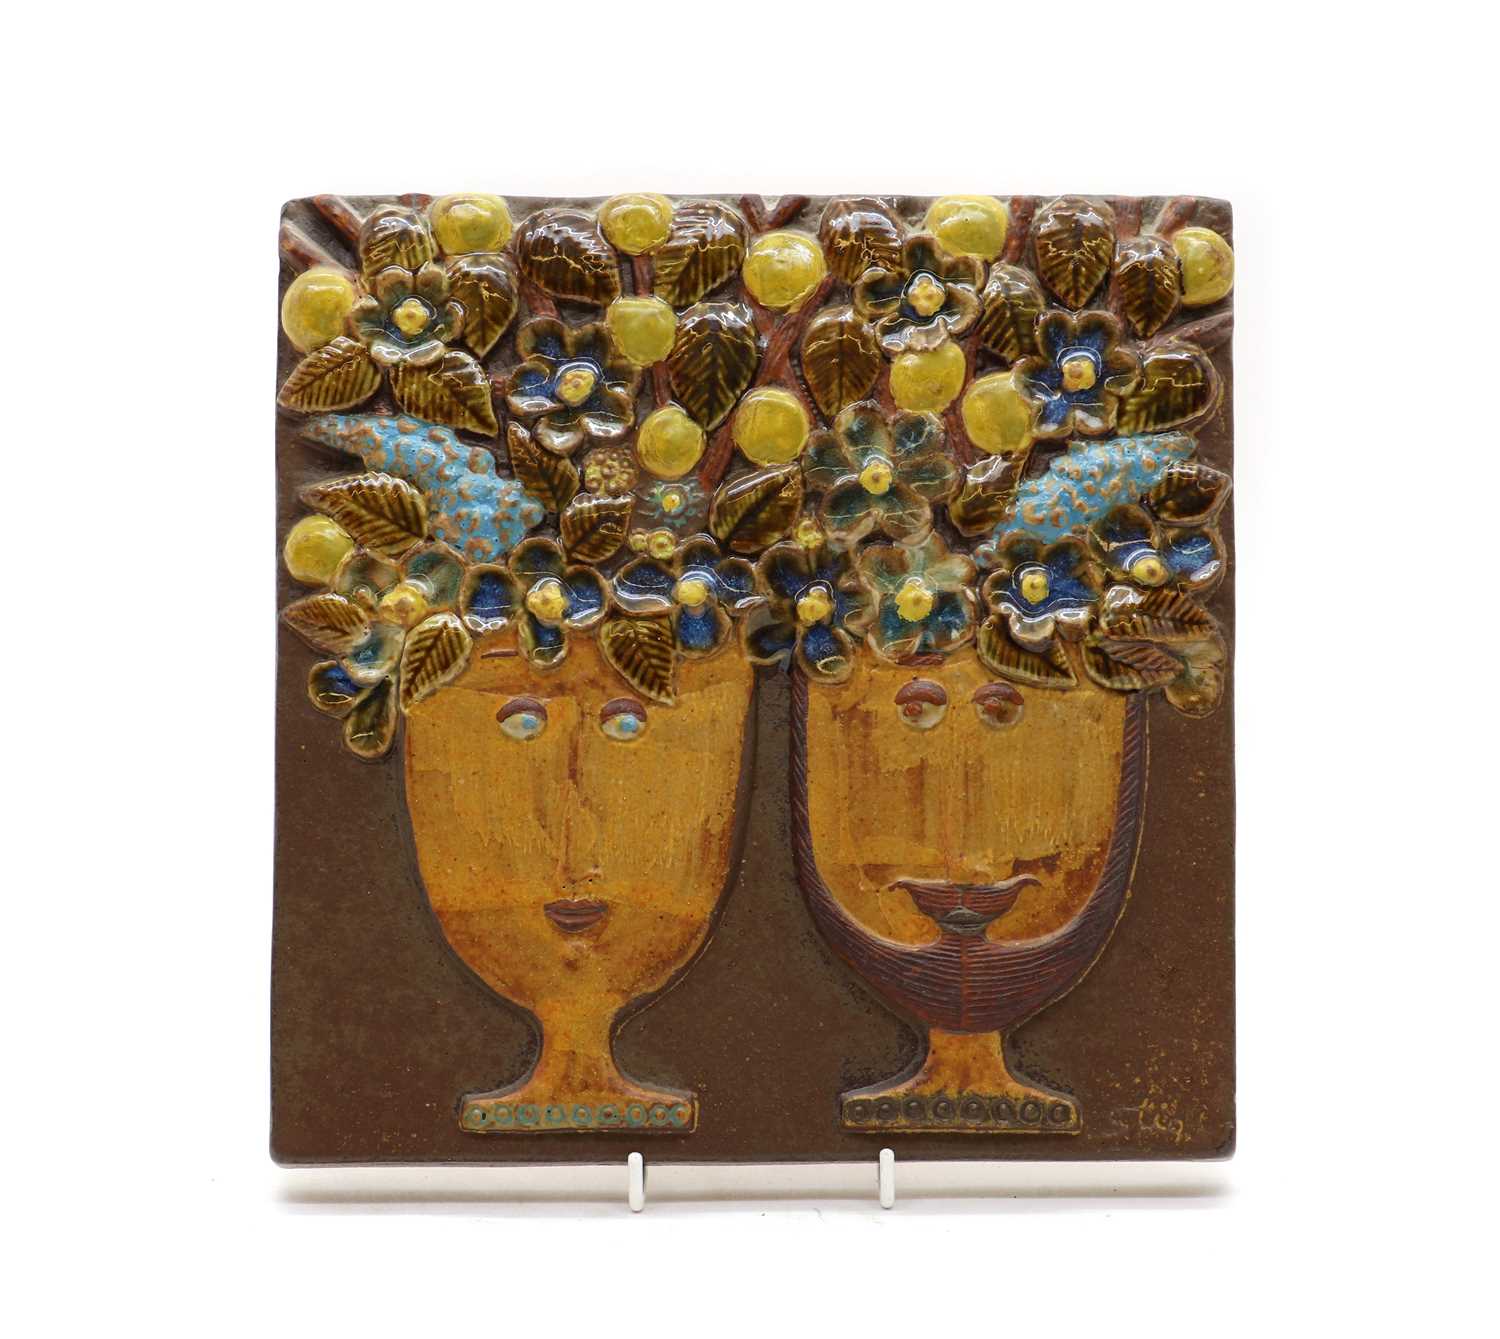 A Gustavsberg glazed wall plaque, Stig Lindberg, depicting two heads on cups, with fruit and leaves,